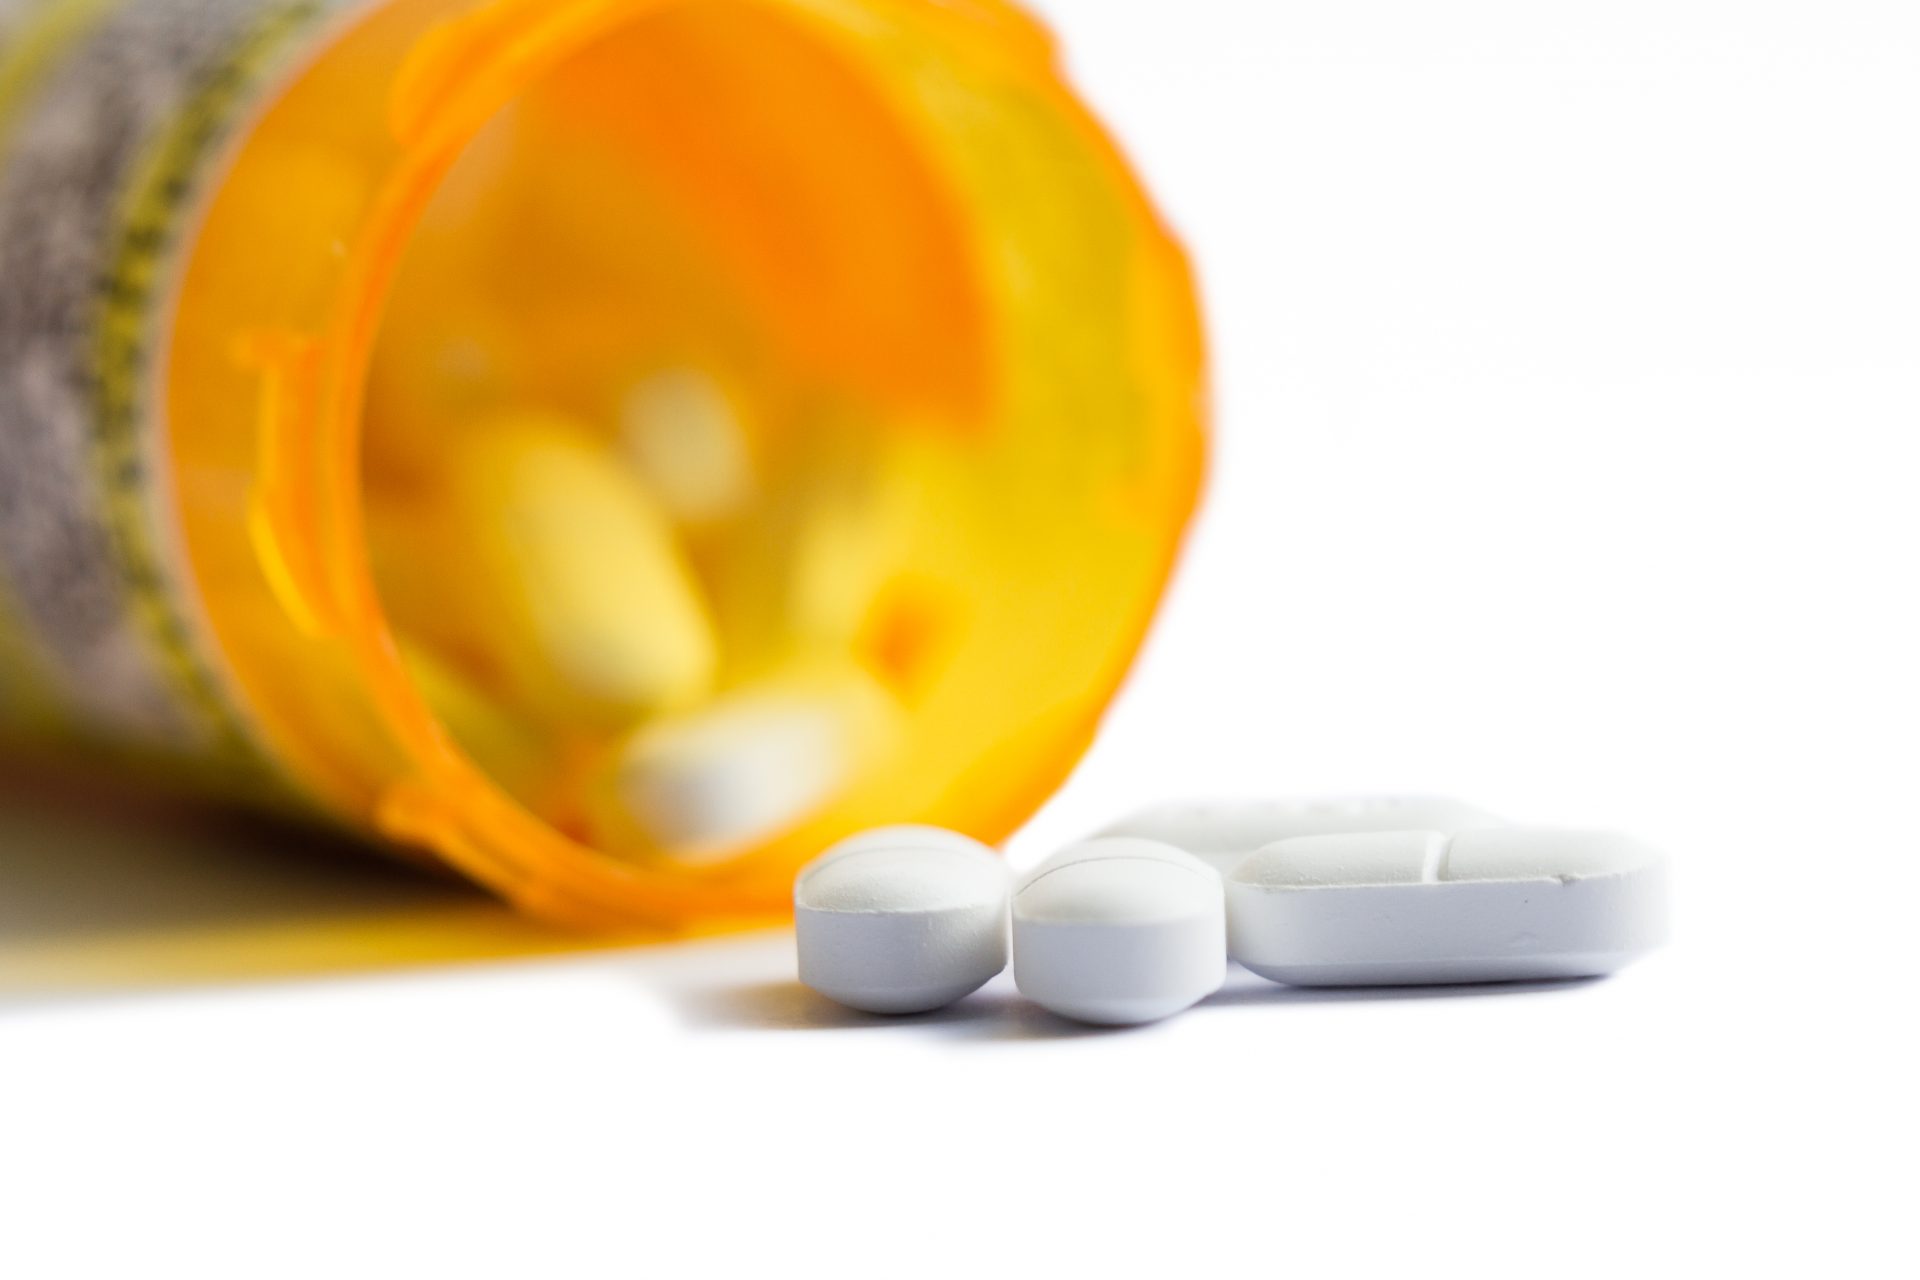 Why are Prescription Drugs Commonly Abused?